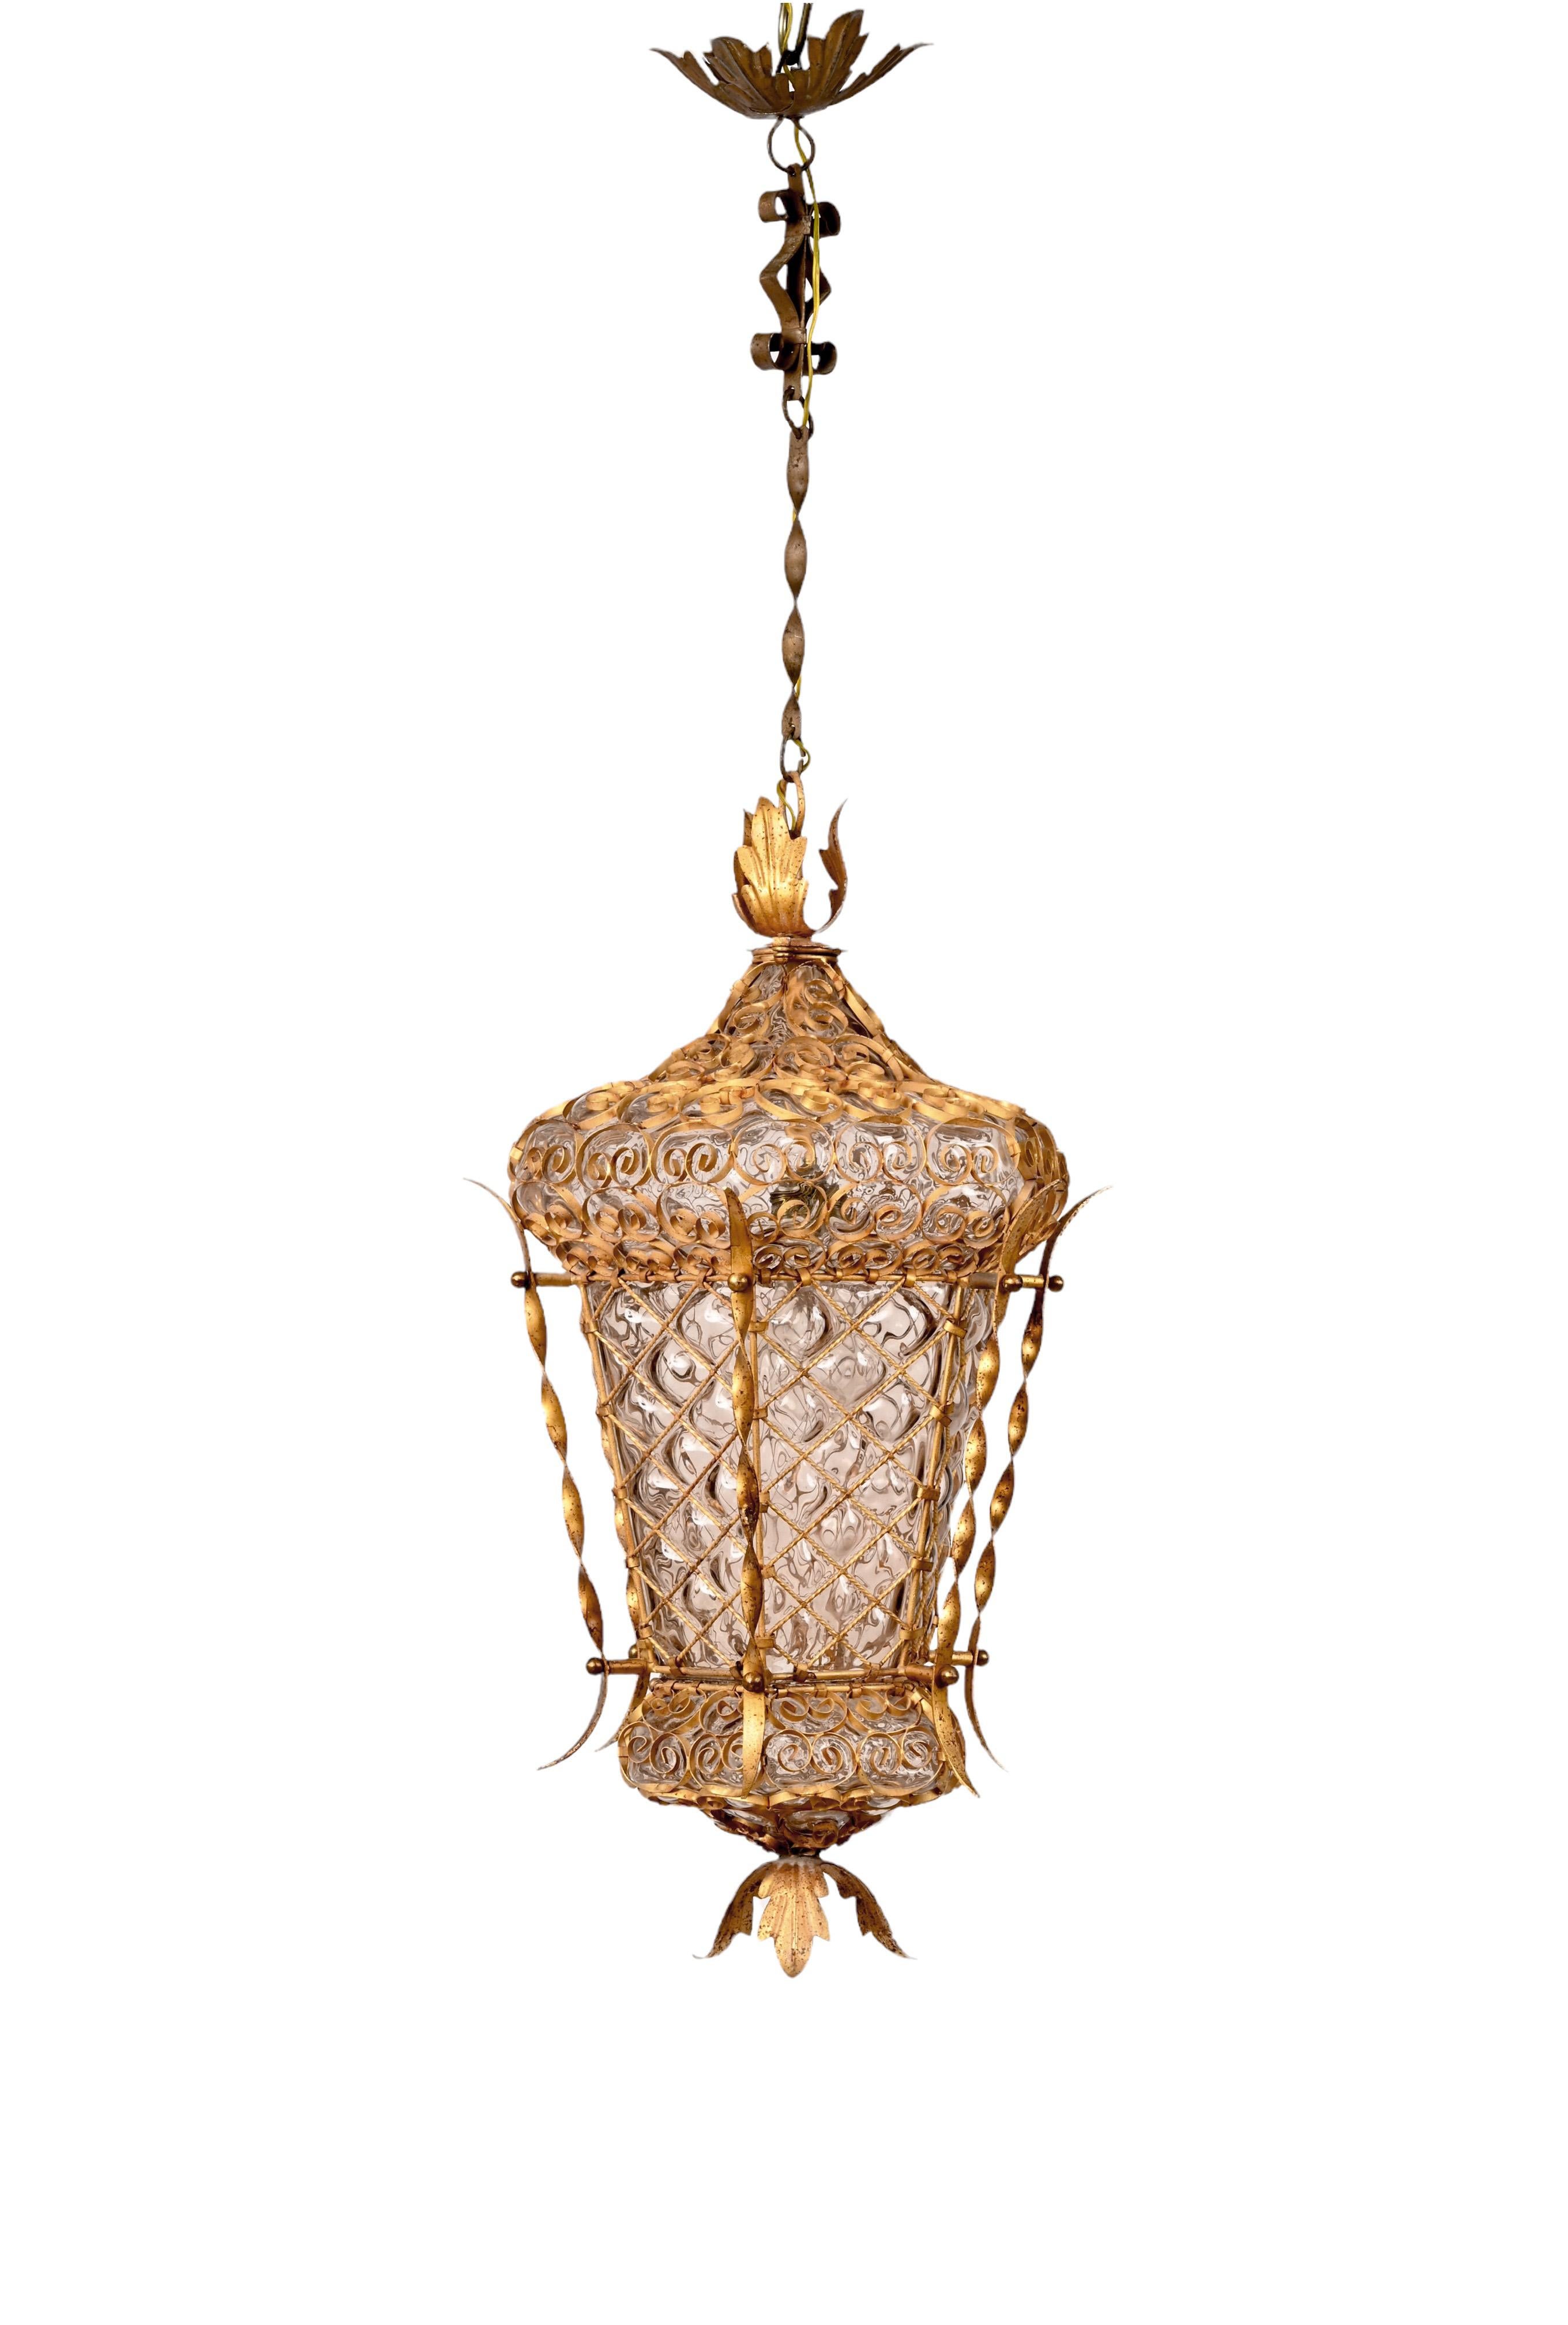 Midcentury Venetian Mouth Blown Glass in Gold Painted Metal Frame Lantern, 1940s In Good Condition For Sale In Roma, IT